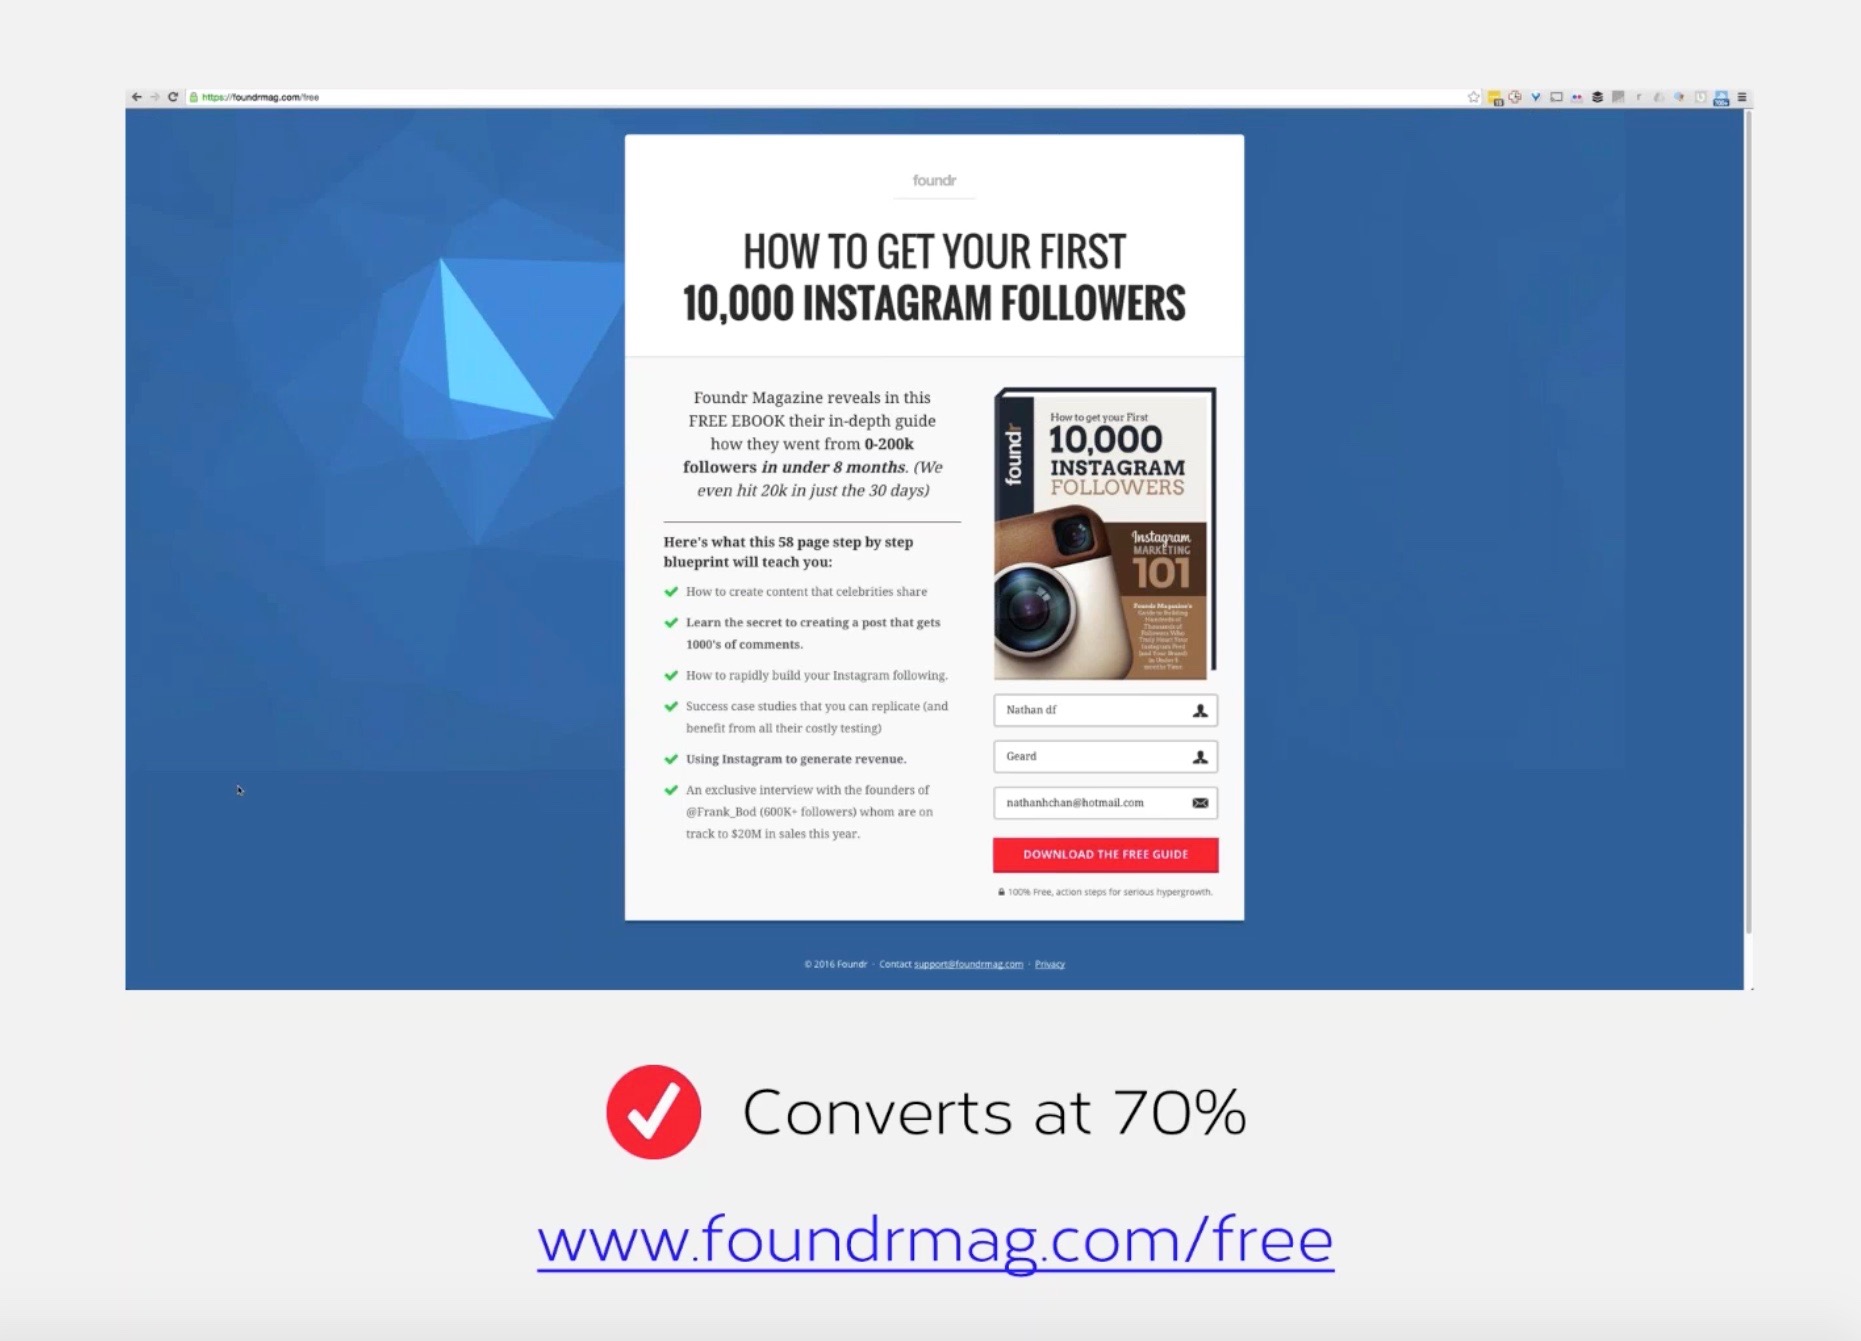 Foundr uses high-performing landing pages to convert Instagram followers